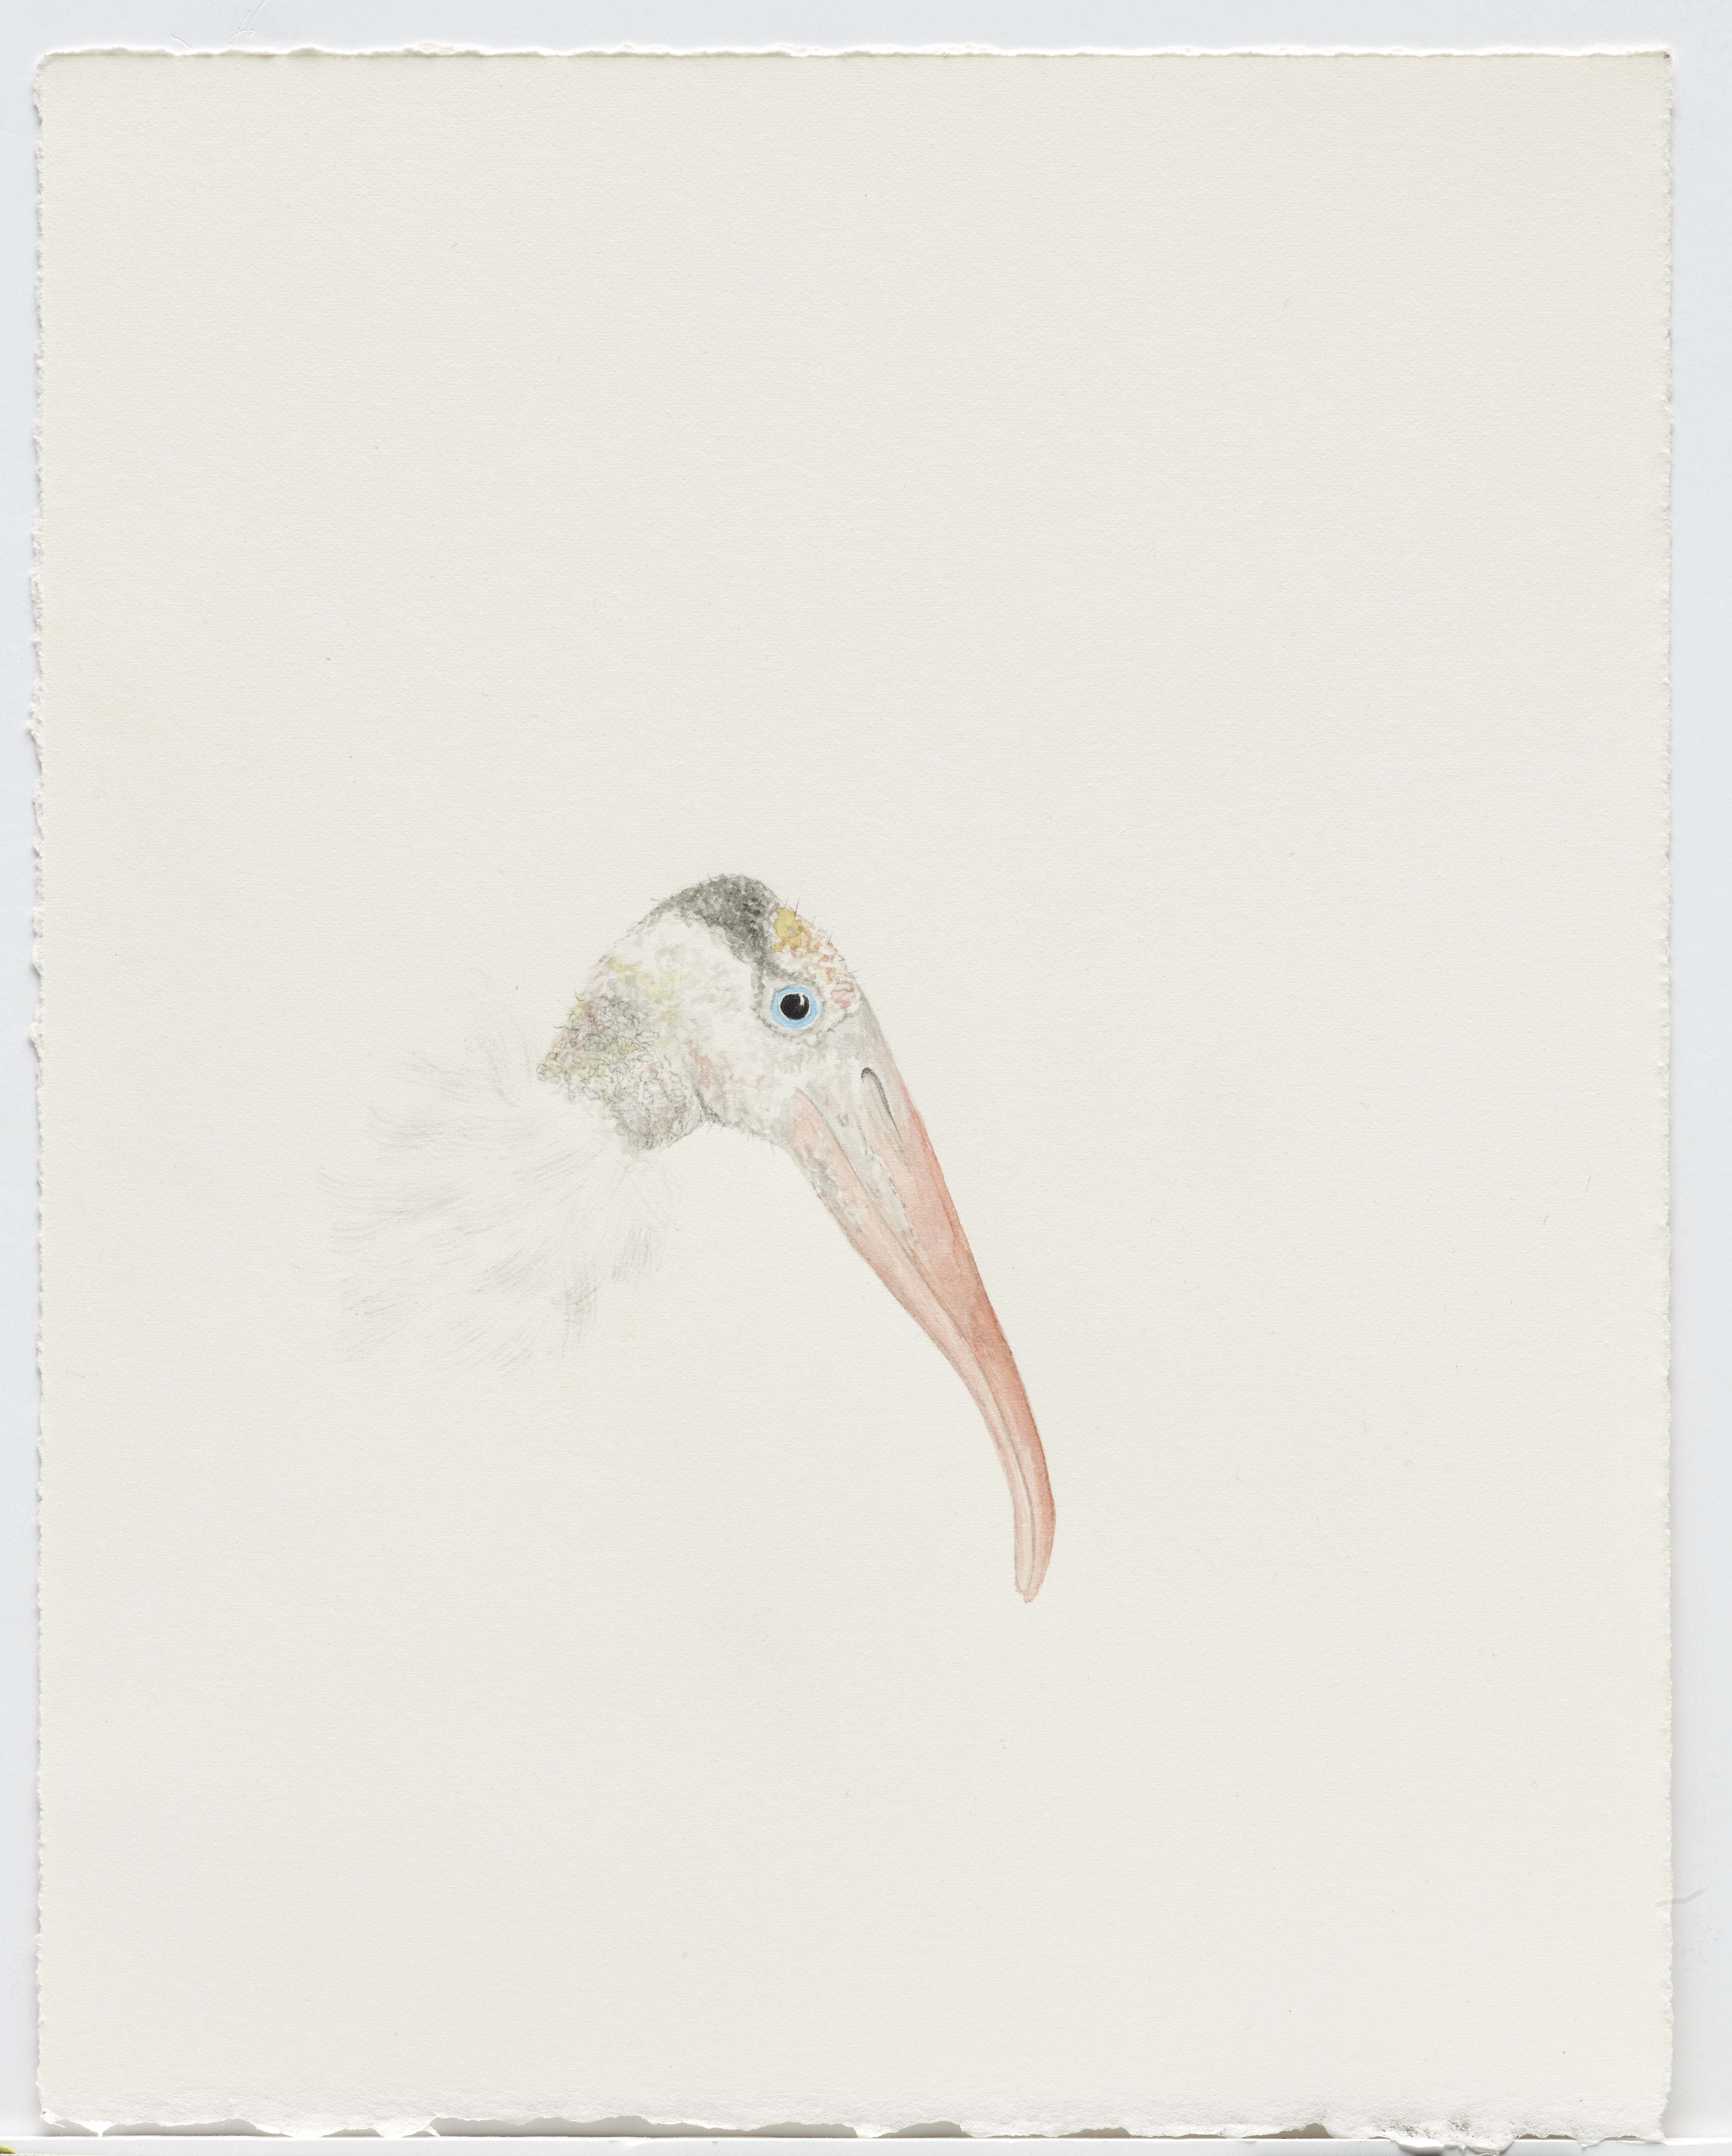 Image: Wood Stork, Trinity River, Dallas, 2018, watercolor and pencil on Arches paper, 10.25 x 8 inches is courtesy the artist and Talley Dunn Gallery, Dallas. Photograph by Chad Redmon.